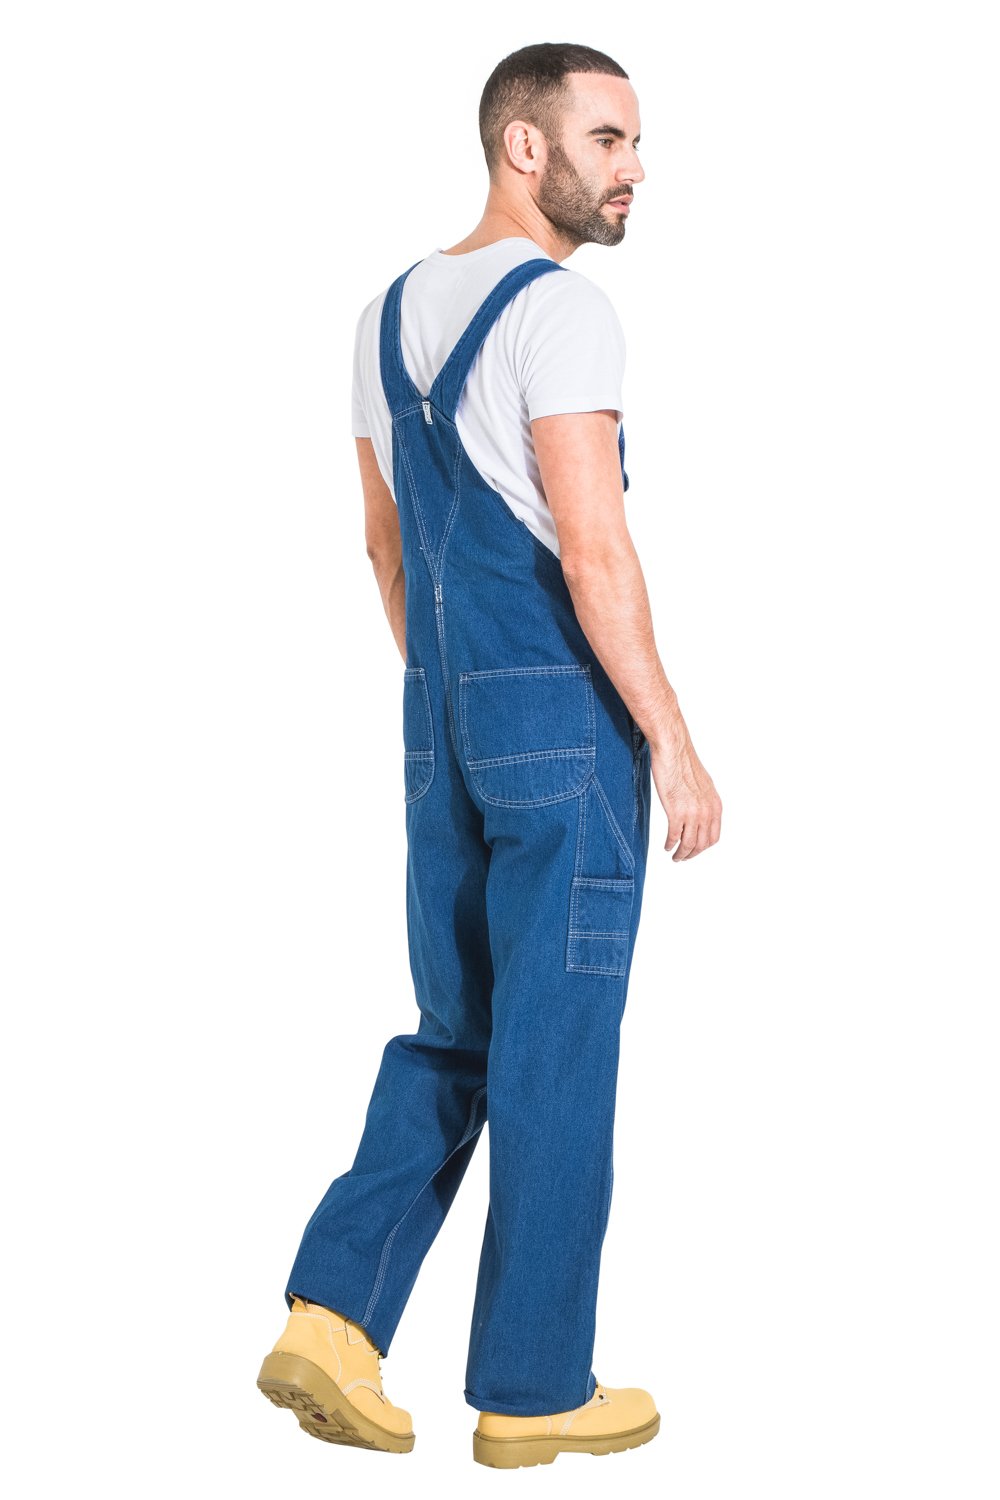 Full side view of stonewash ‘Key USA’ bib-overall, showing back cross straps, rear and thigh pockets.